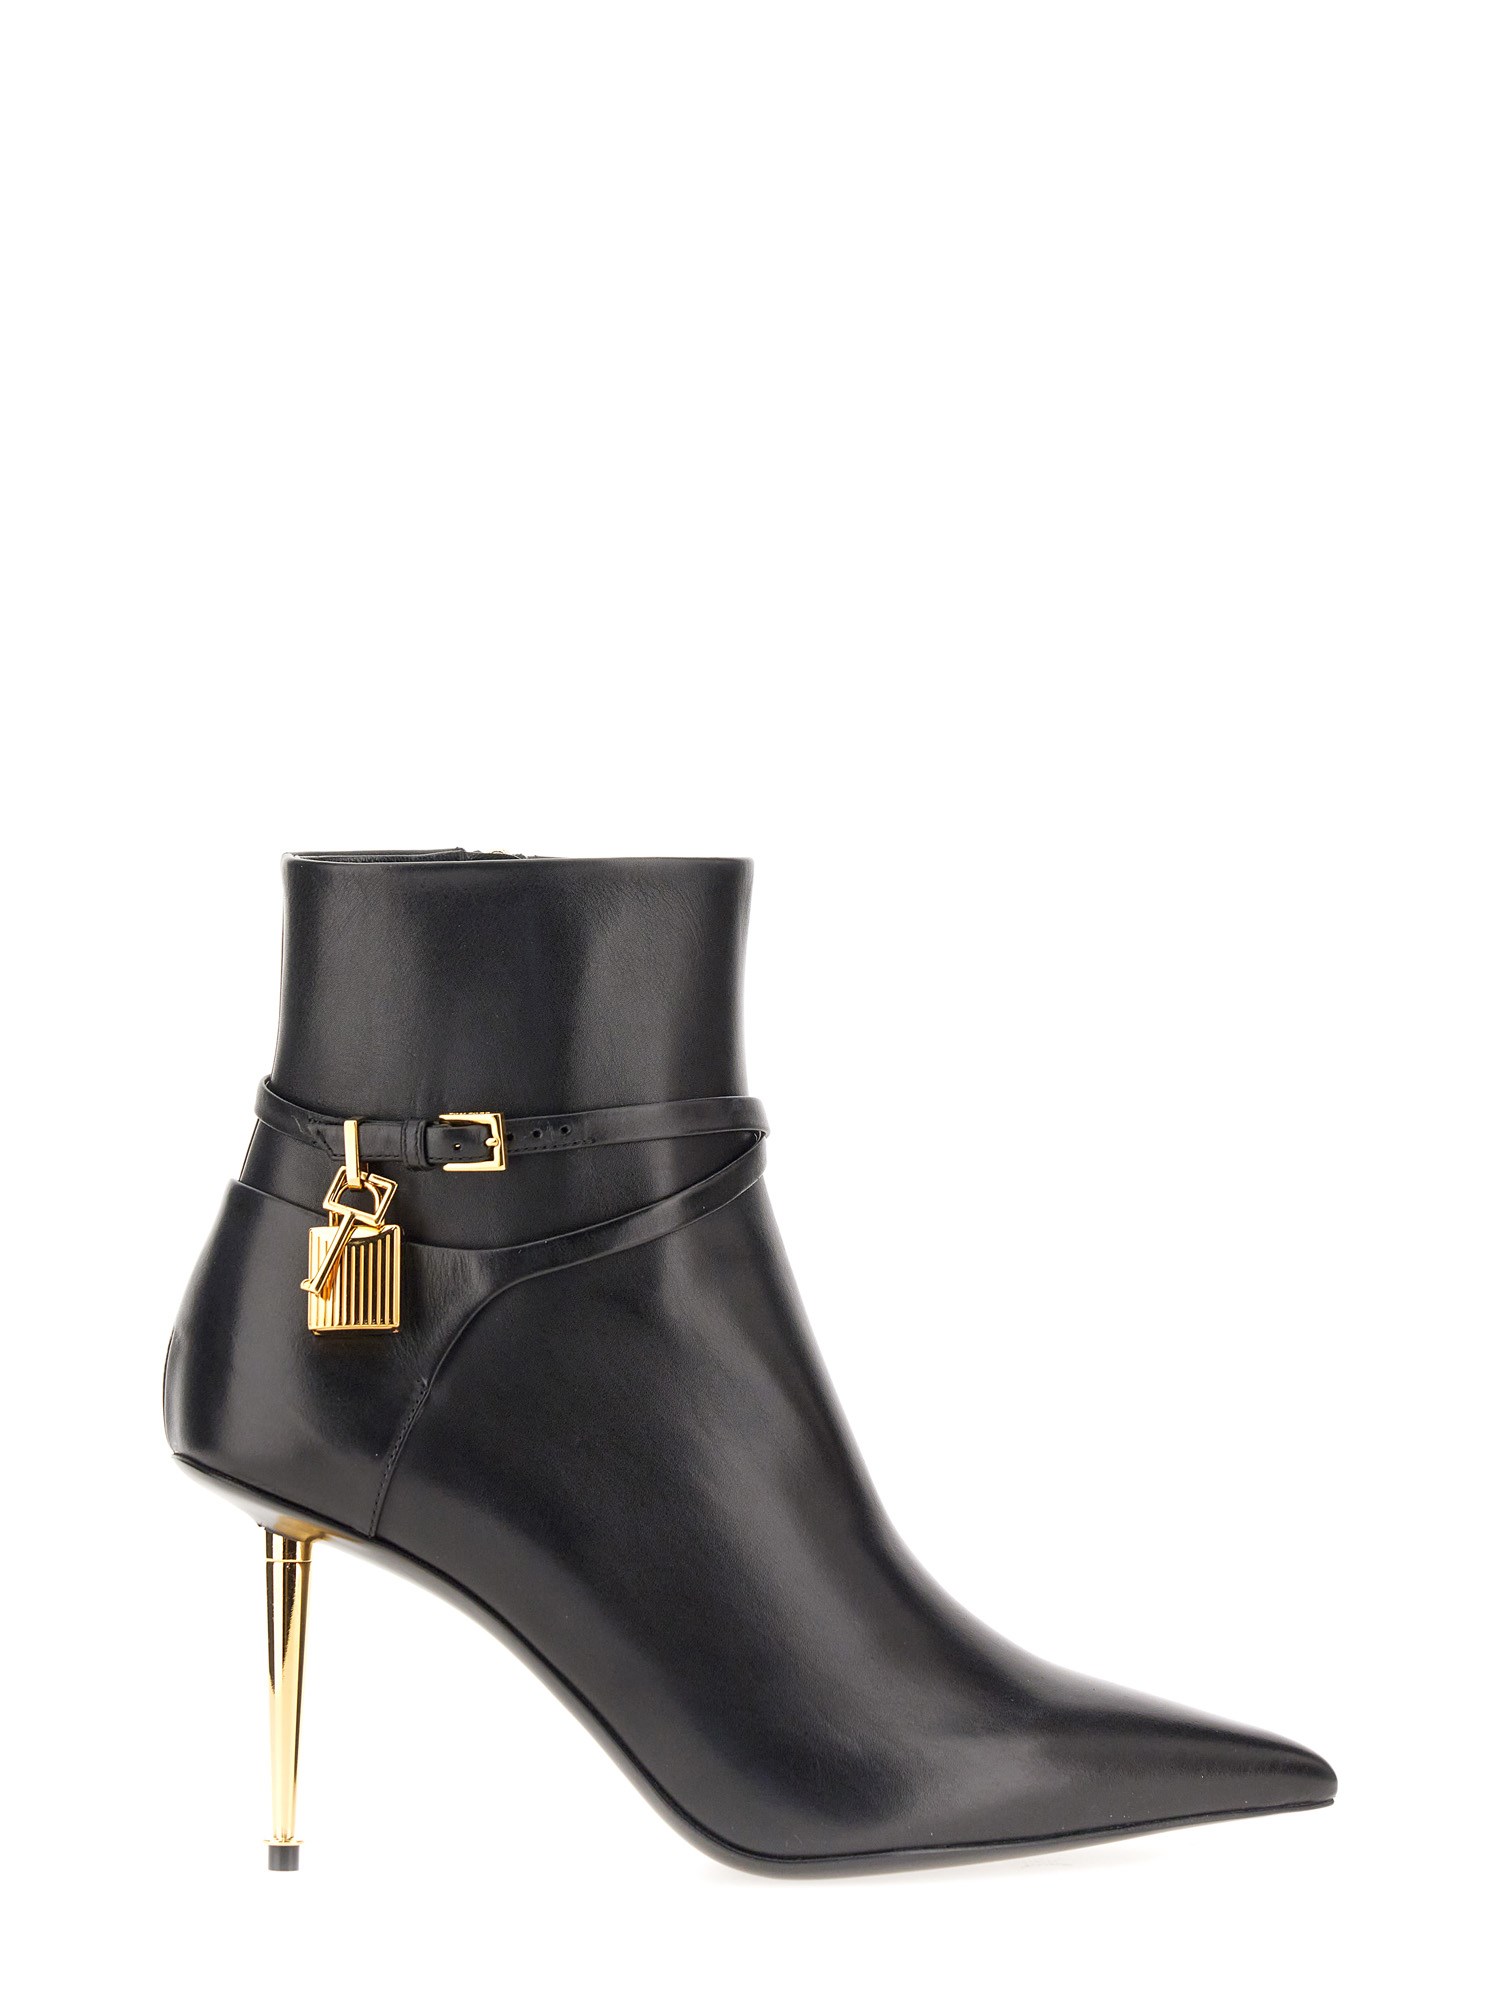 Tom Ford Boots Shoes In Black